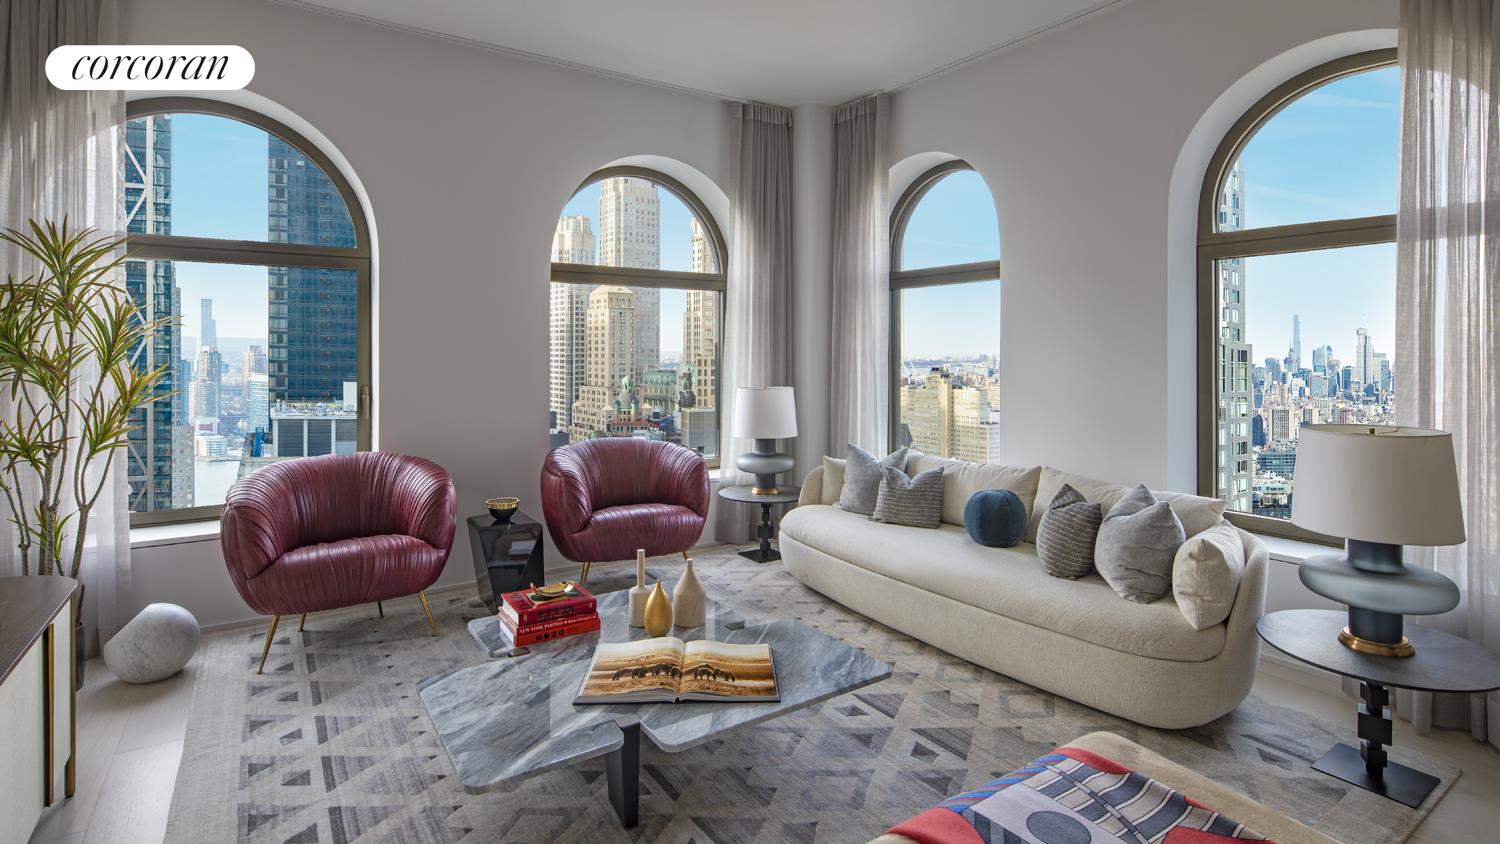 130 William Street 52D, Lower Manhattan, Downtown, NYC - 3 Bedrooms  
3 Bathrooms  
5 Rooms - 